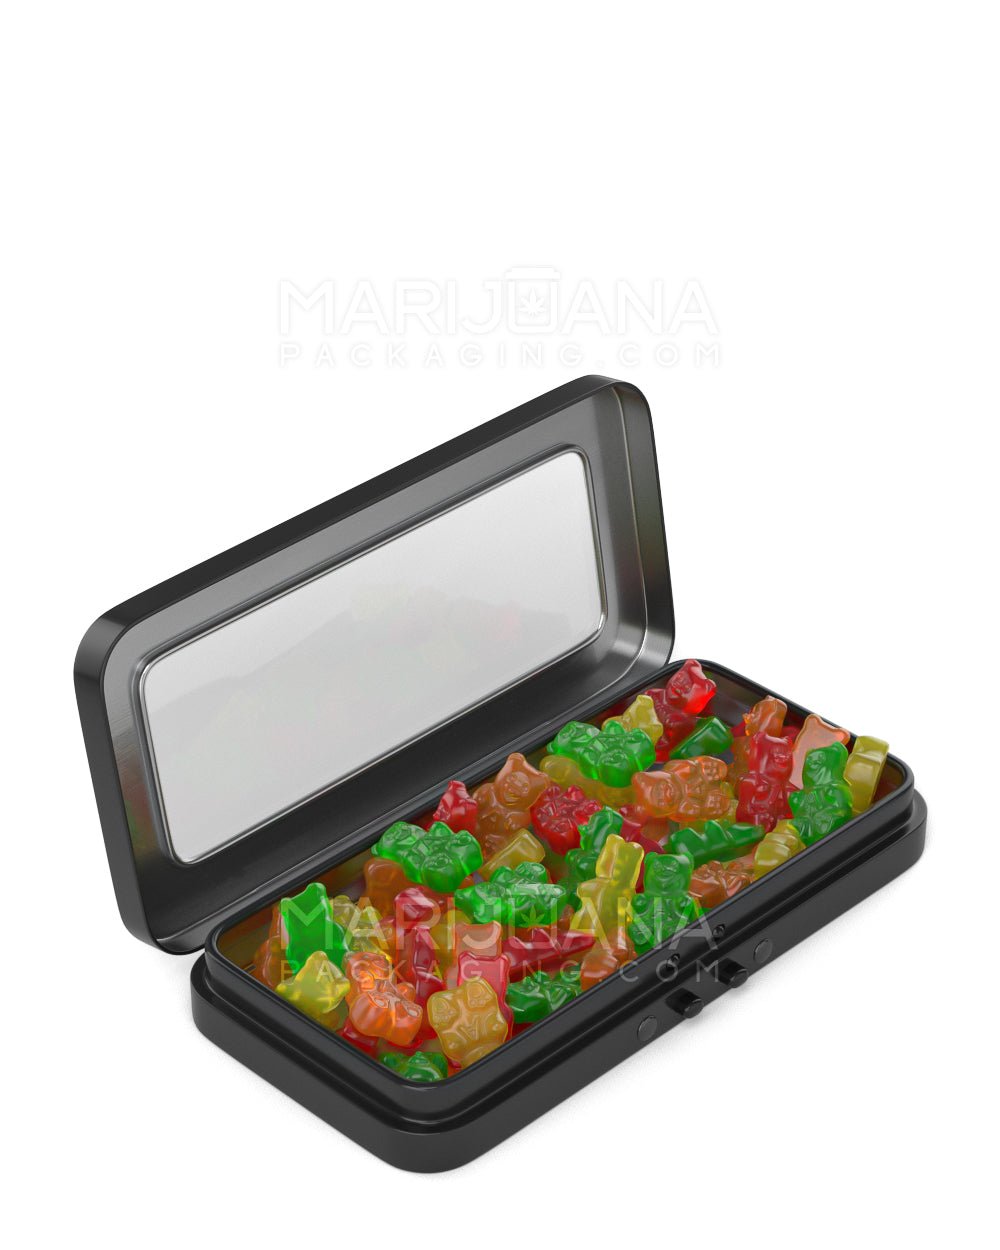 Child Resistant & Sustainable | Hinged-Lid Large Vista Edible & Joint Box w/ See-Through Window |  Black Tin  - 2